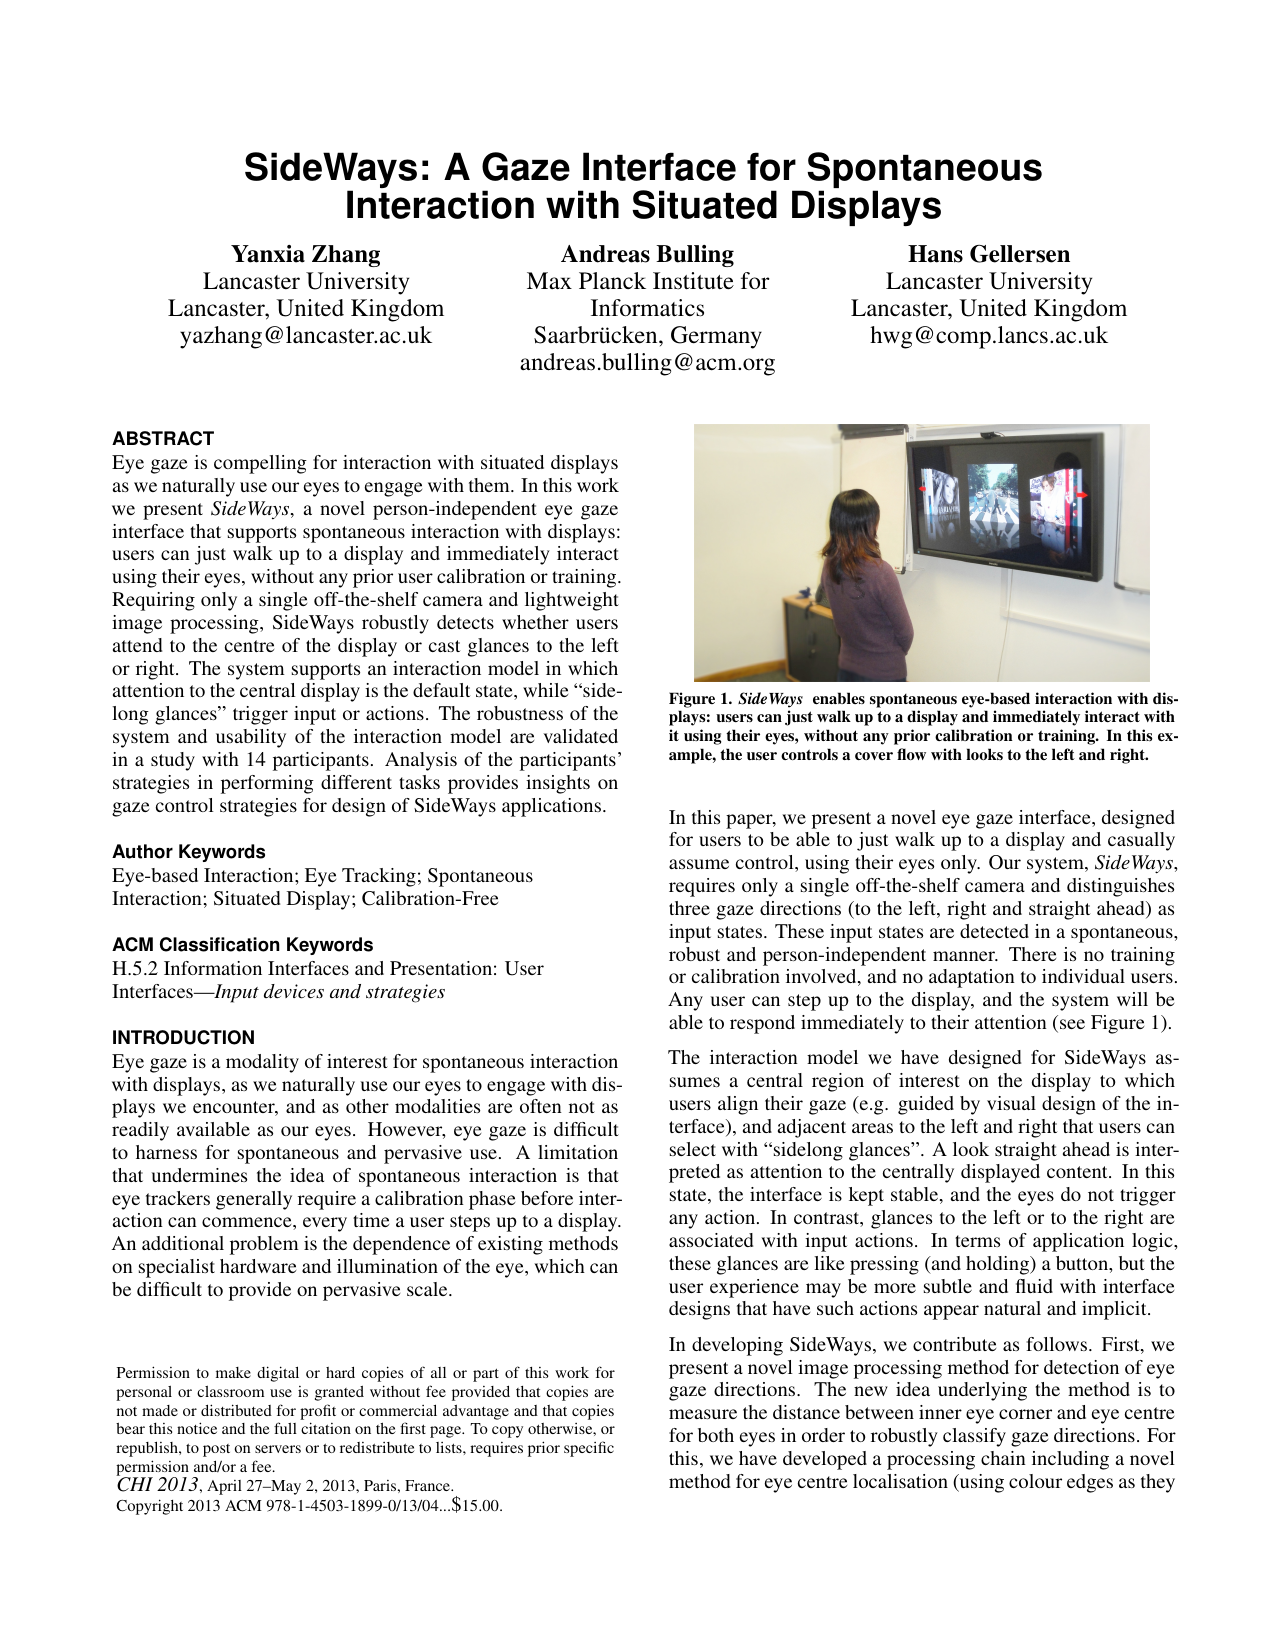 SideWays: A Gaze Interface for Spontaneous Interaction with Situated Displays